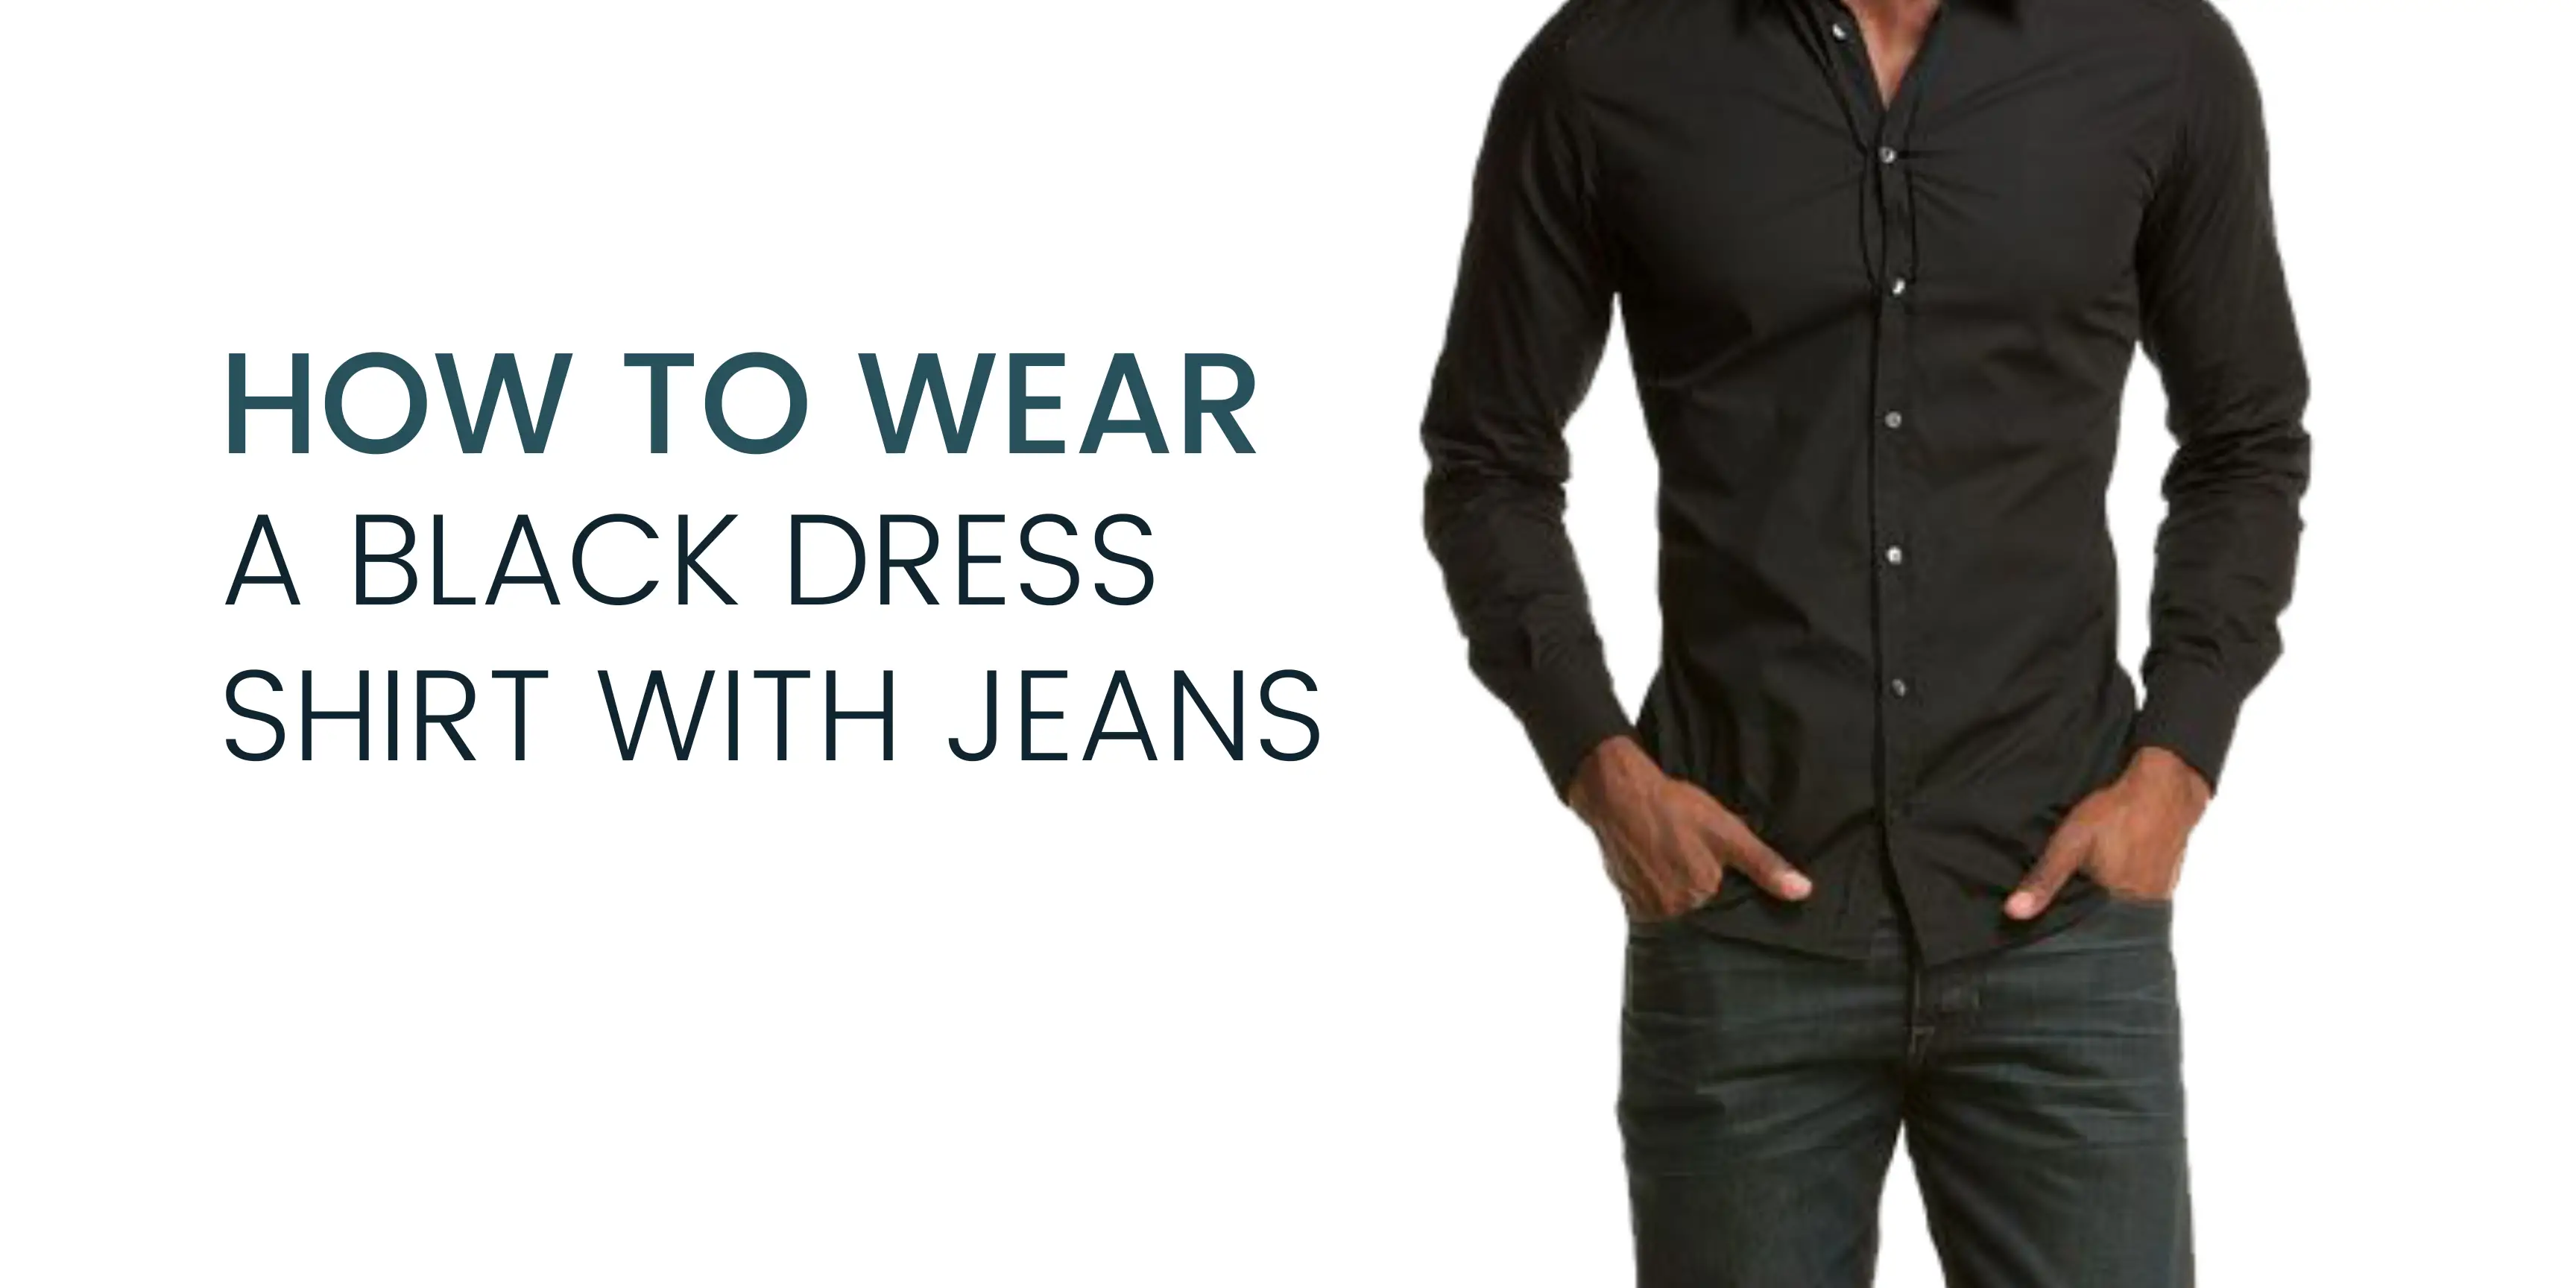 black dress shirt and jeans